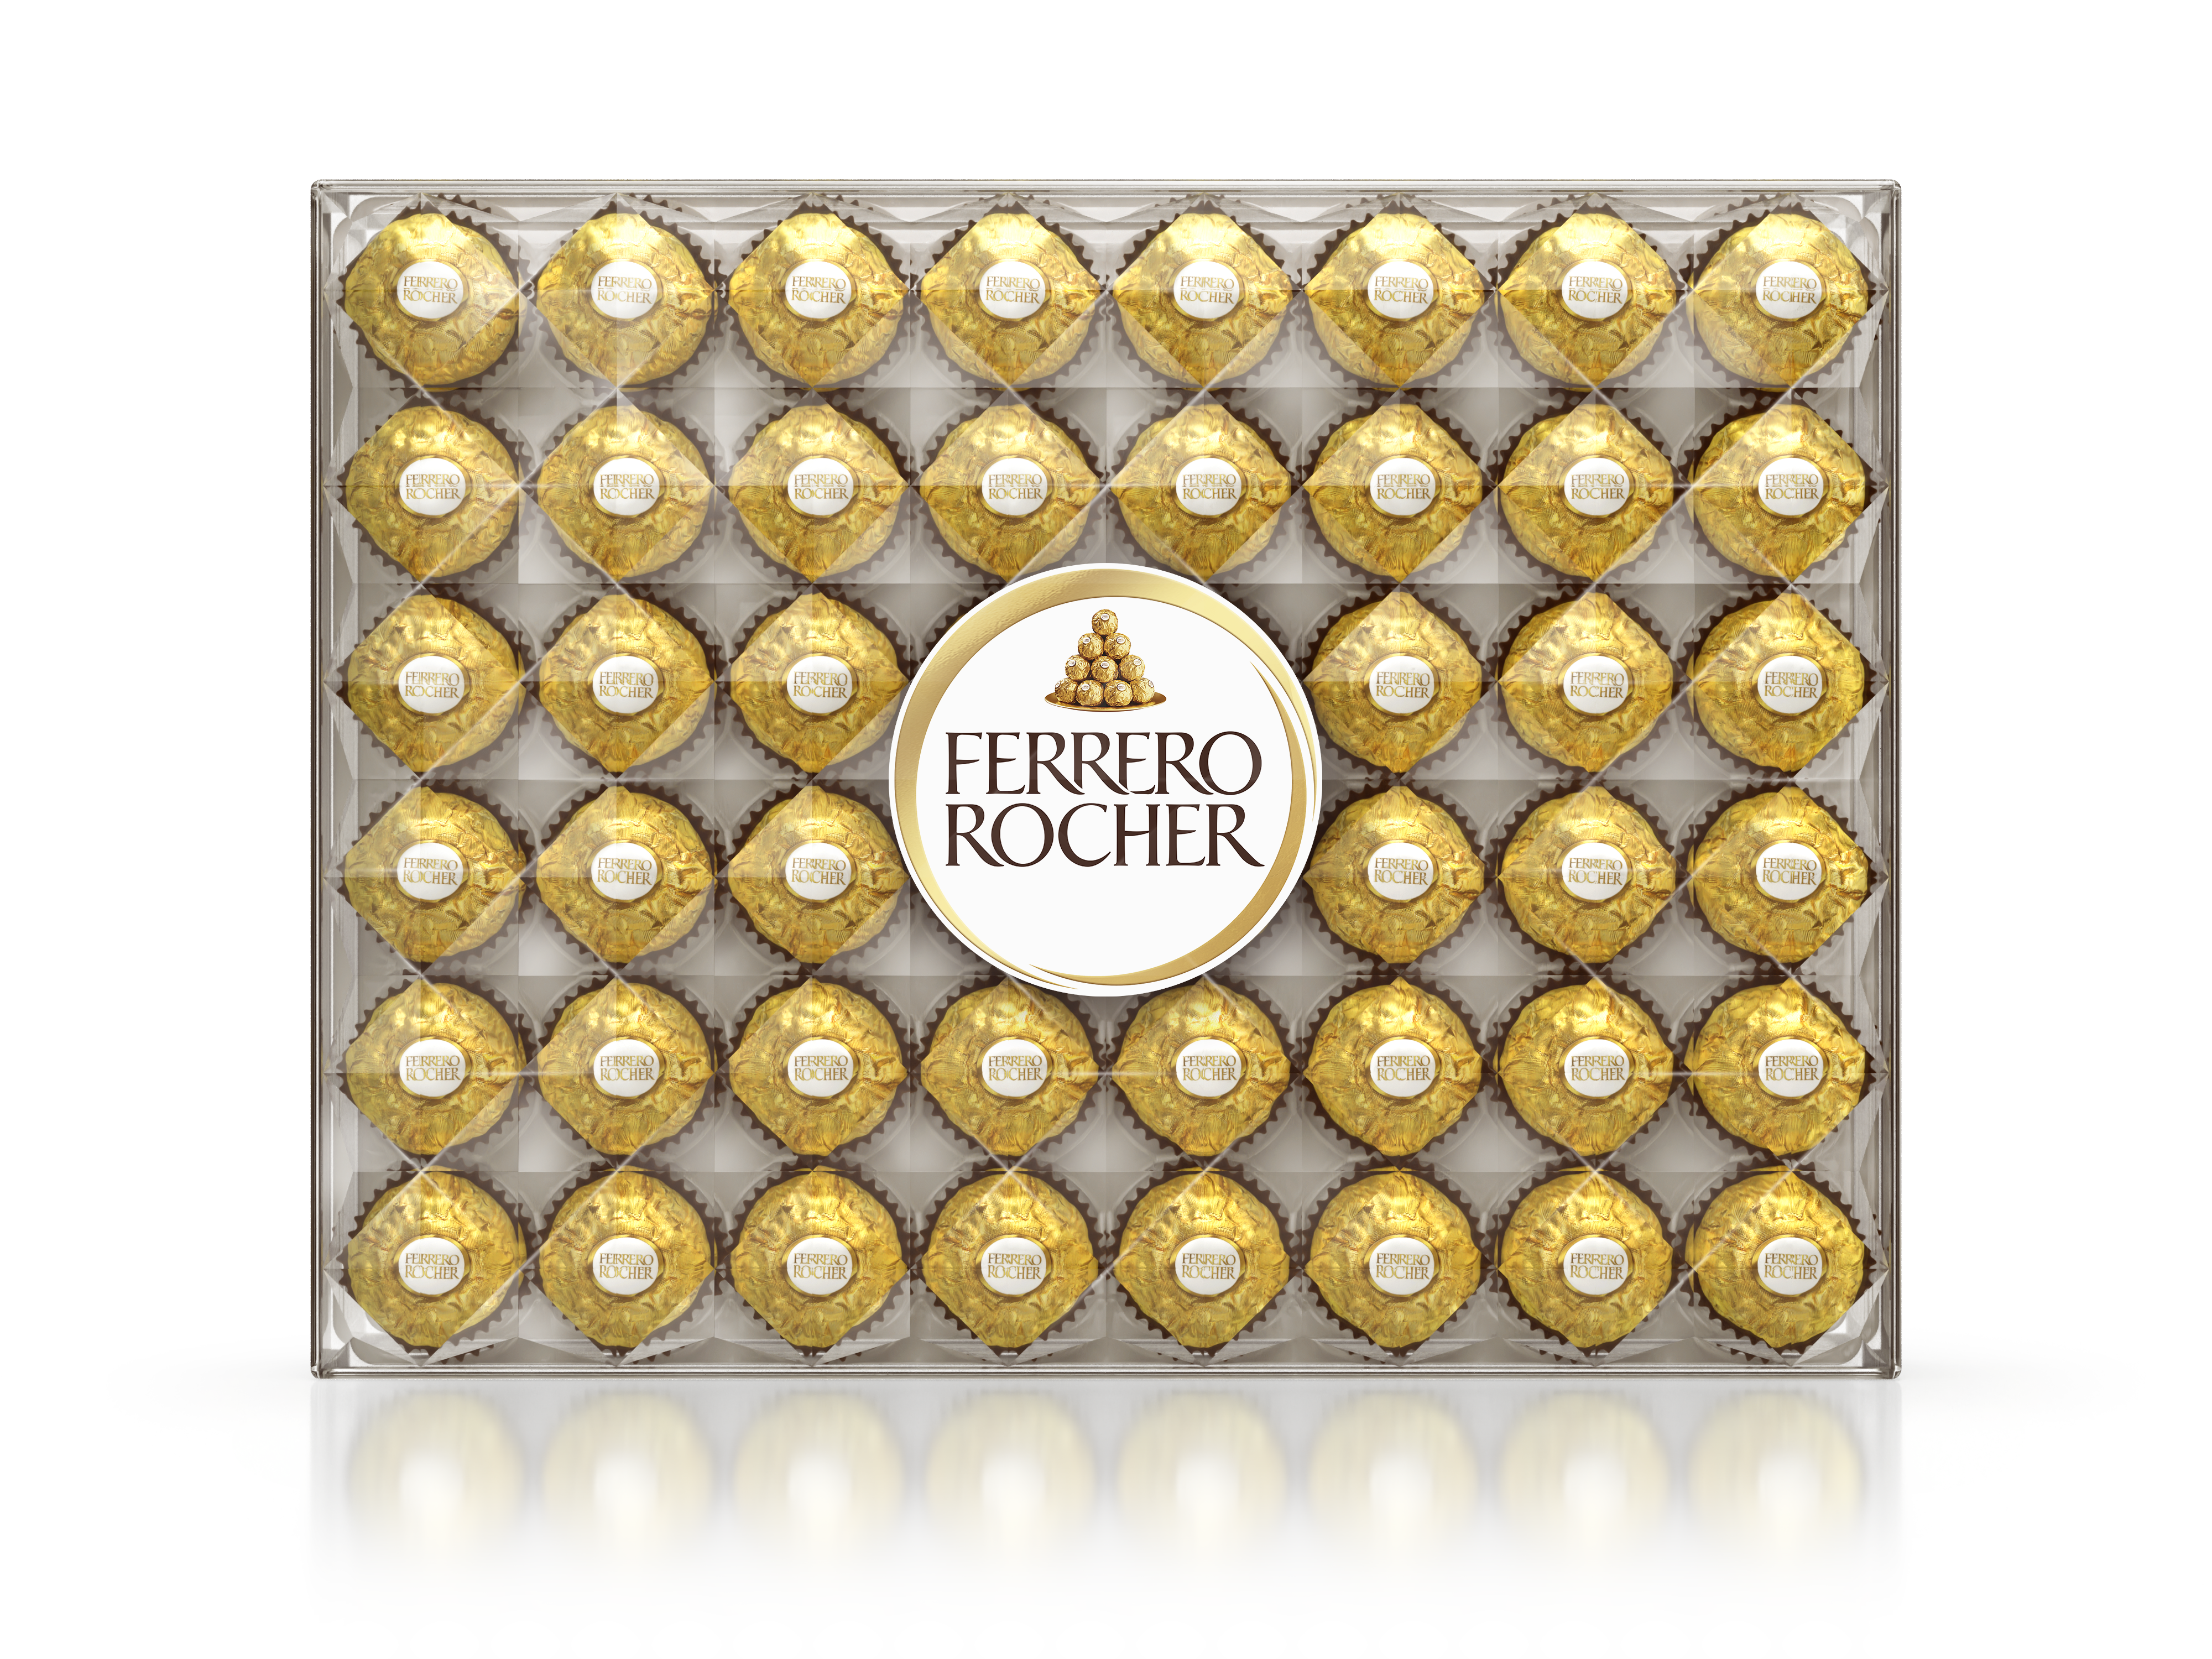  Ferrero Rocher and Rondnoir, 6 Gift Bags, 48 Pieces